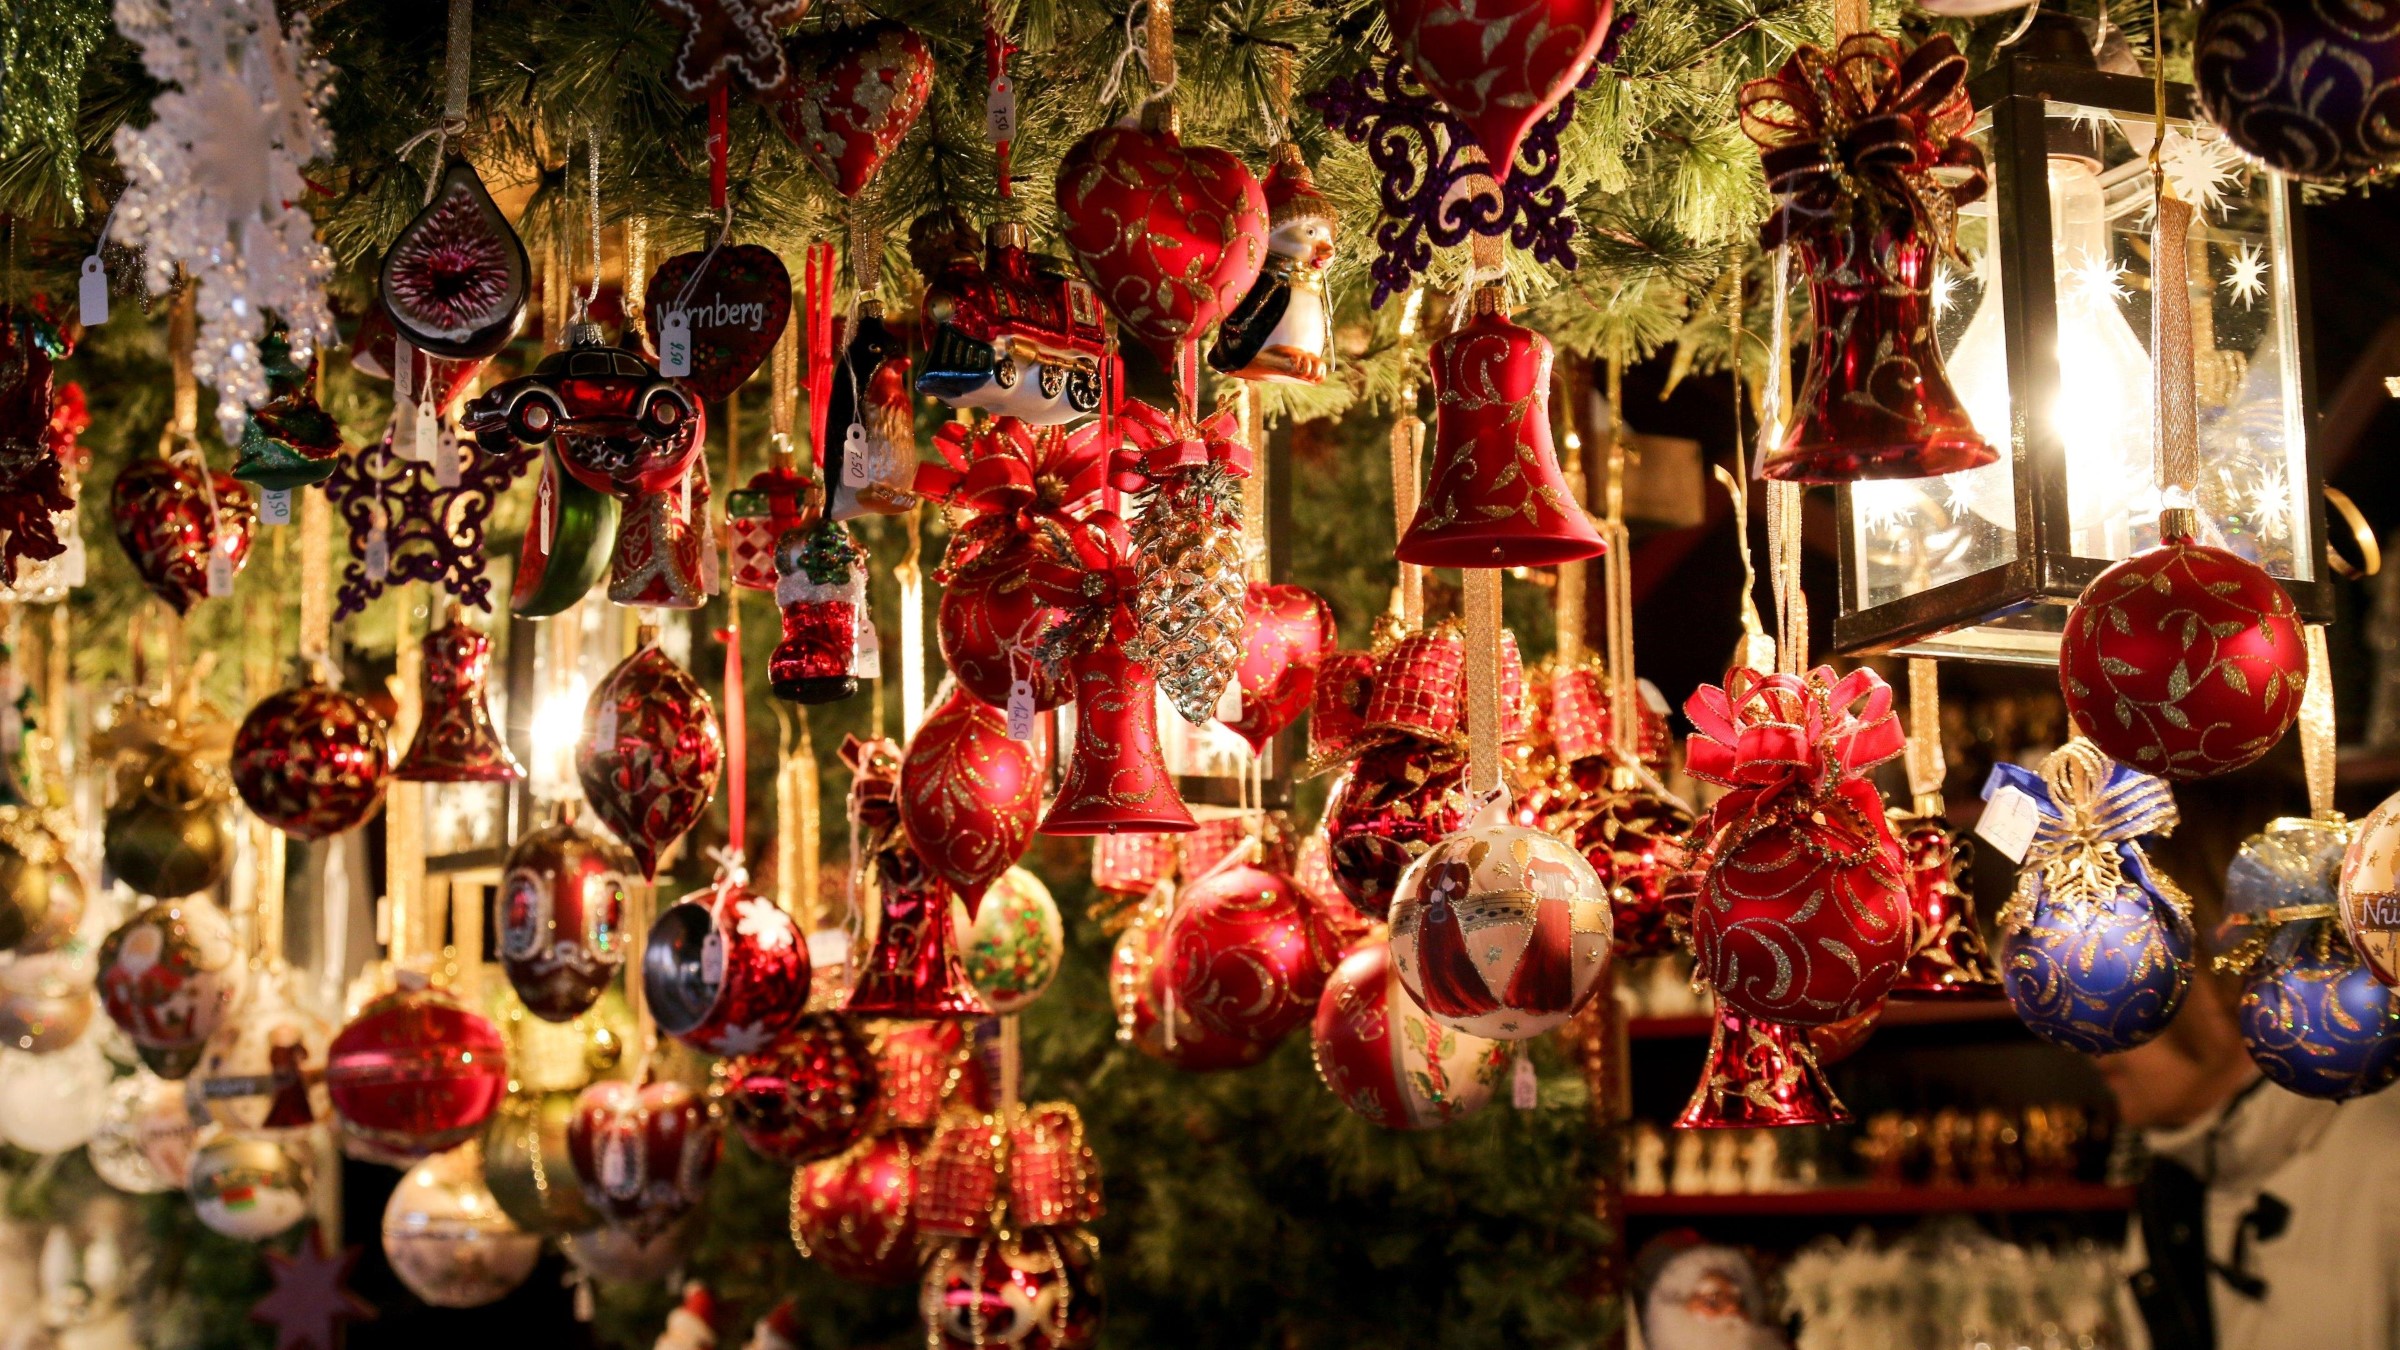 Christmas decorations in German market